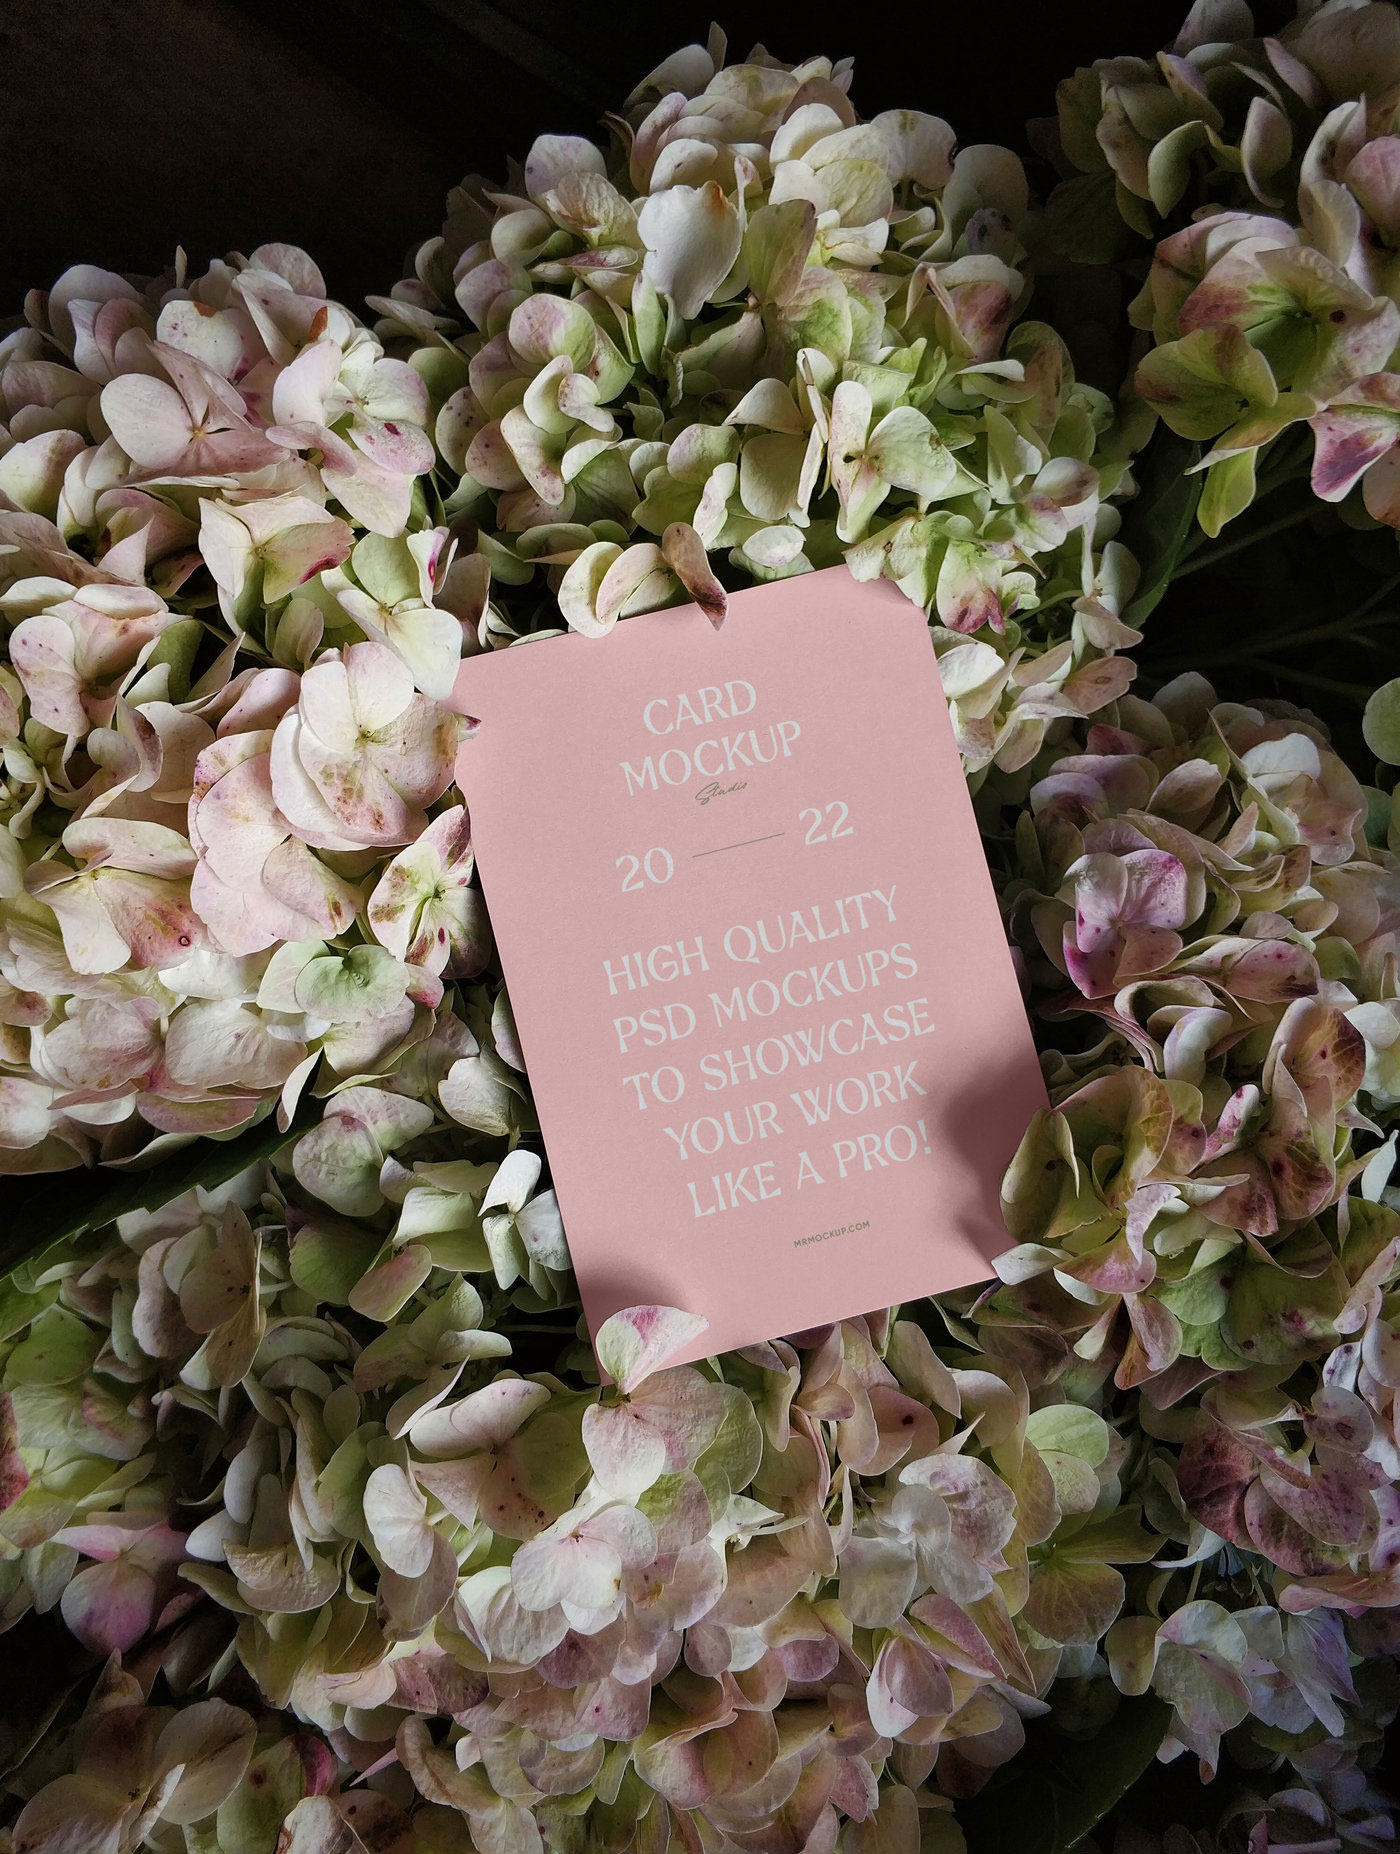 Top View of Card Mockup Among Flowers